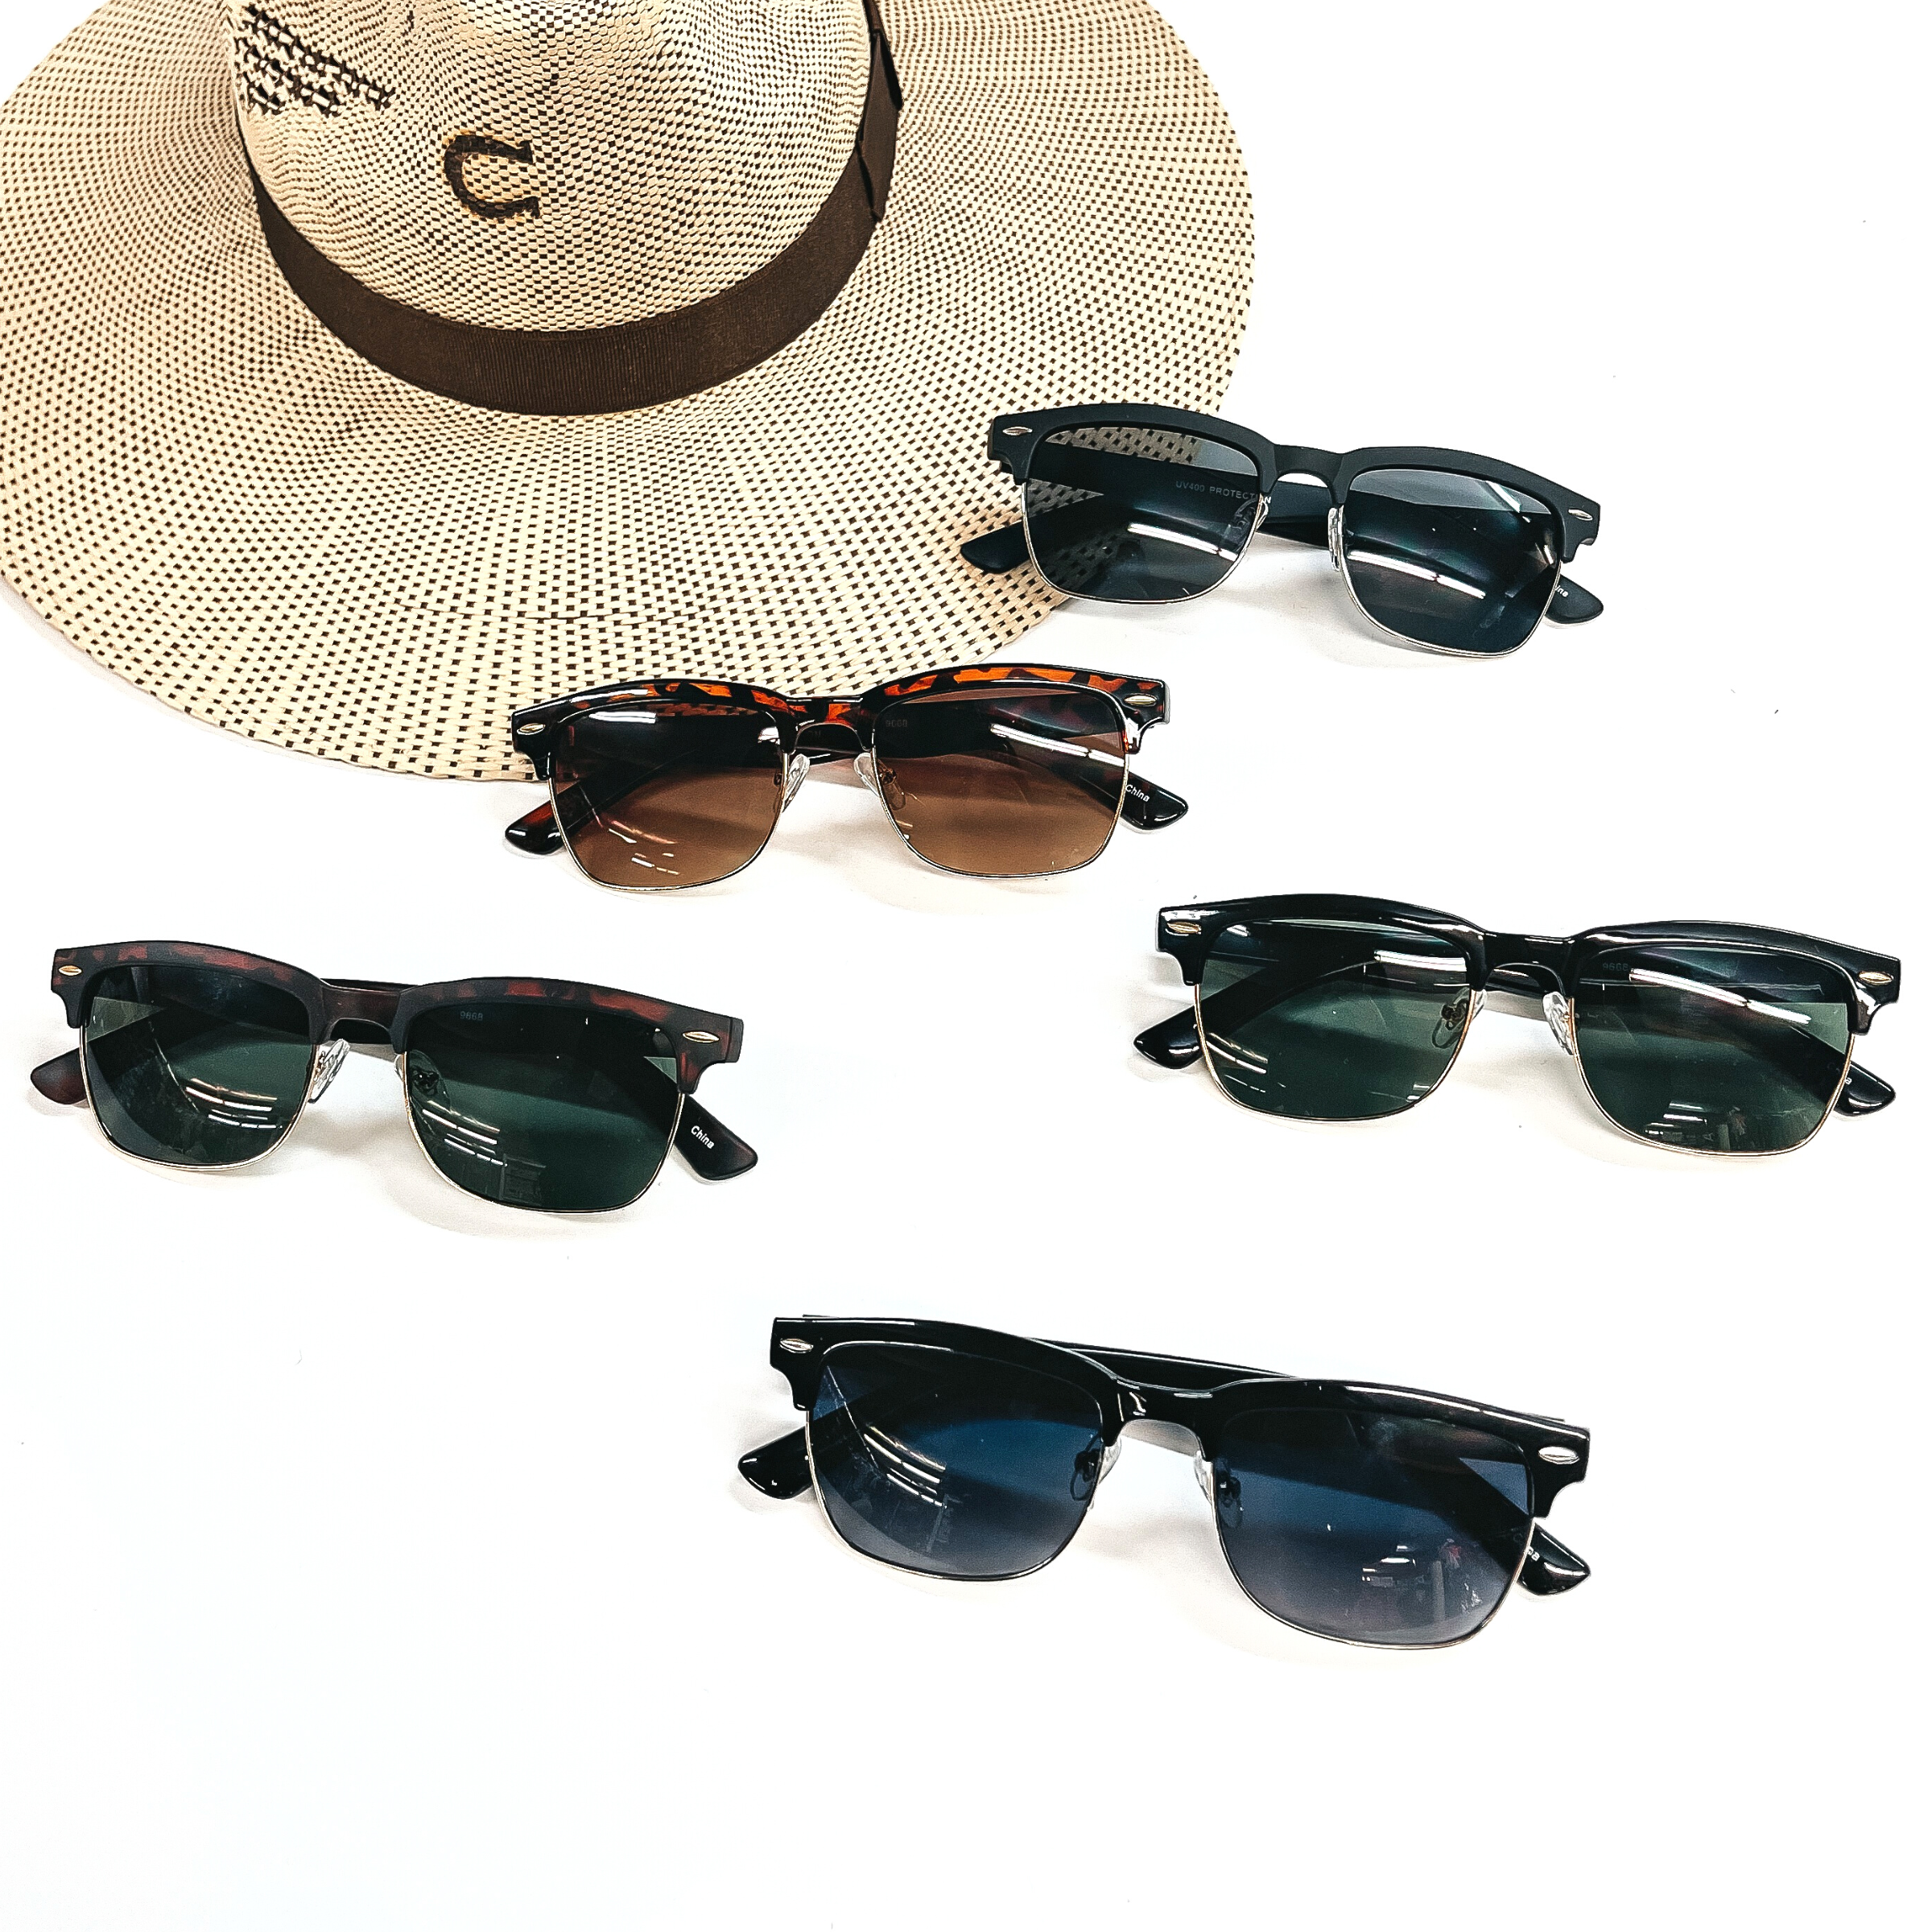 These are five pairs of sunglasses in different colors/prints and lenses.  There is black shine/black matte, tortuoise print in shine/matte. These sunglasses are  taken on a white background with an ivory/brown straw hat in the back as decor. 